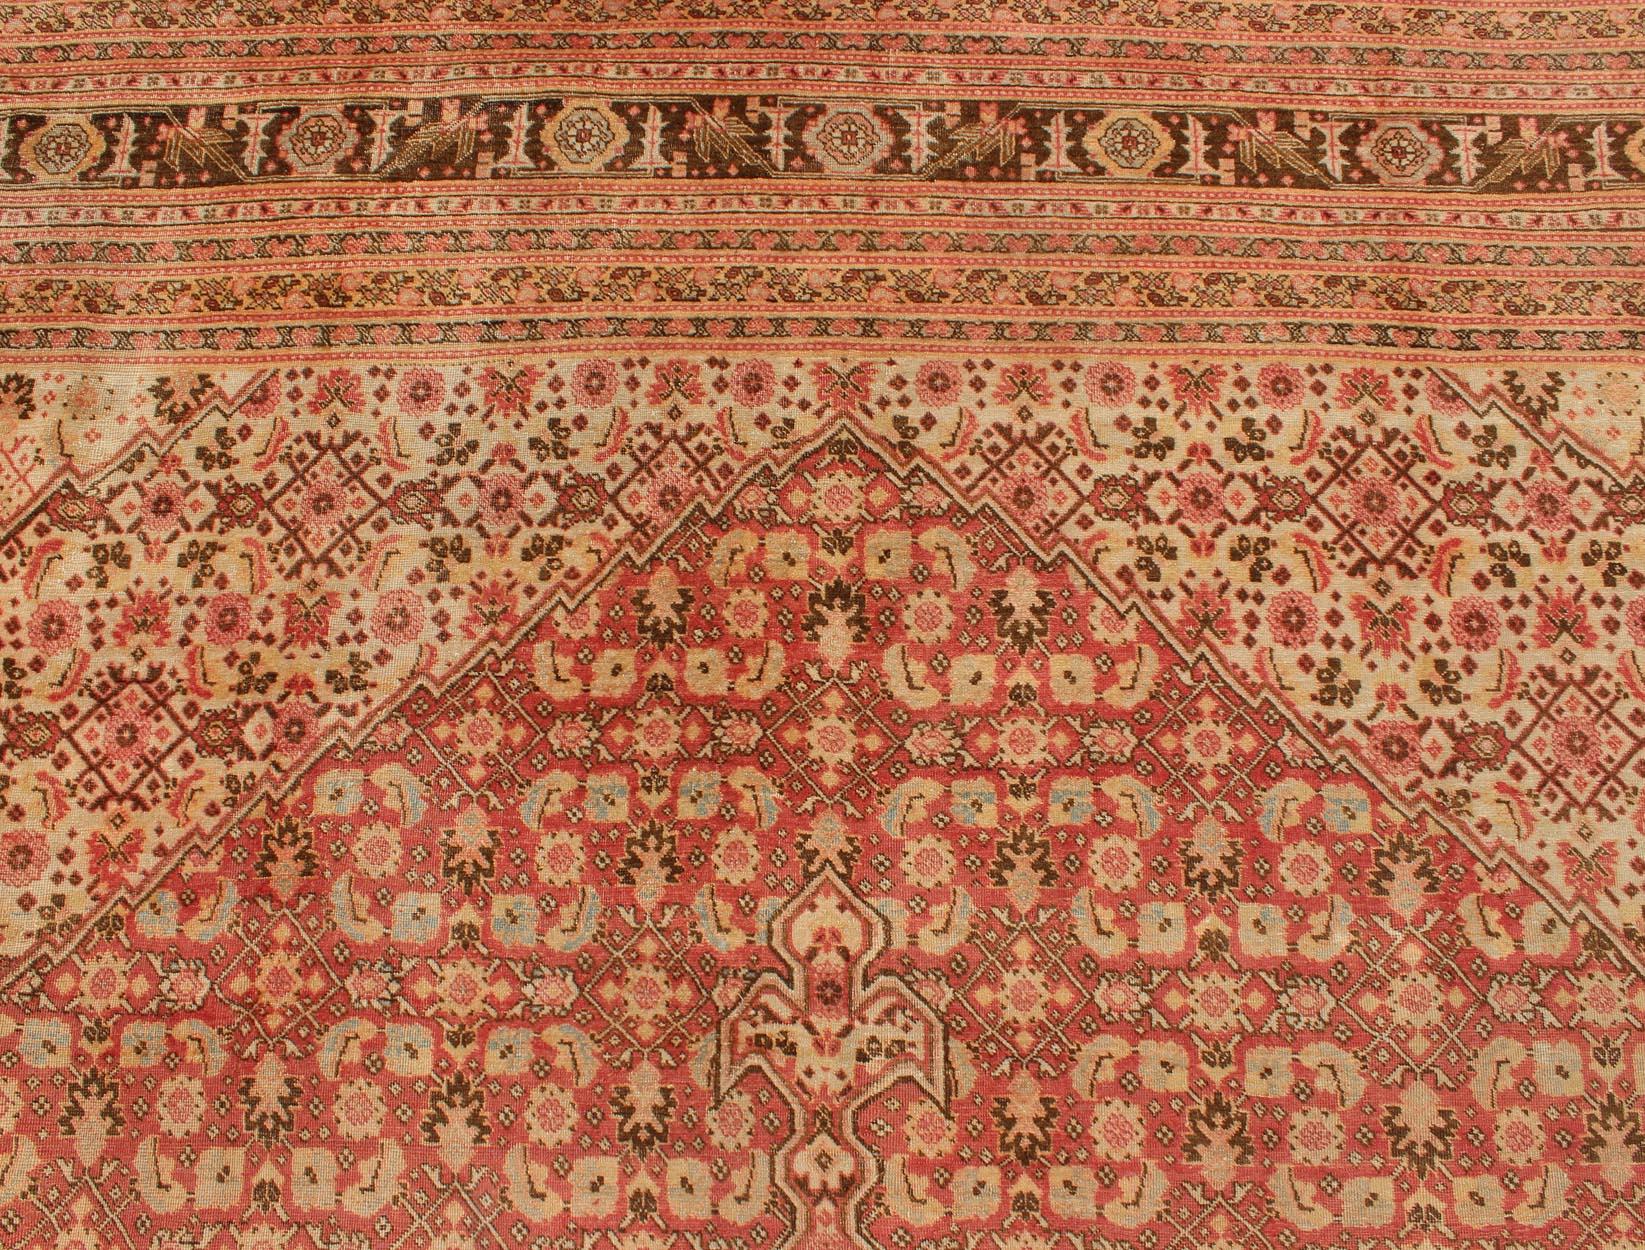 Antique Persian Tabriz Rug with Medallion Design in Coral, Cream and Brown Tones For Sale 7